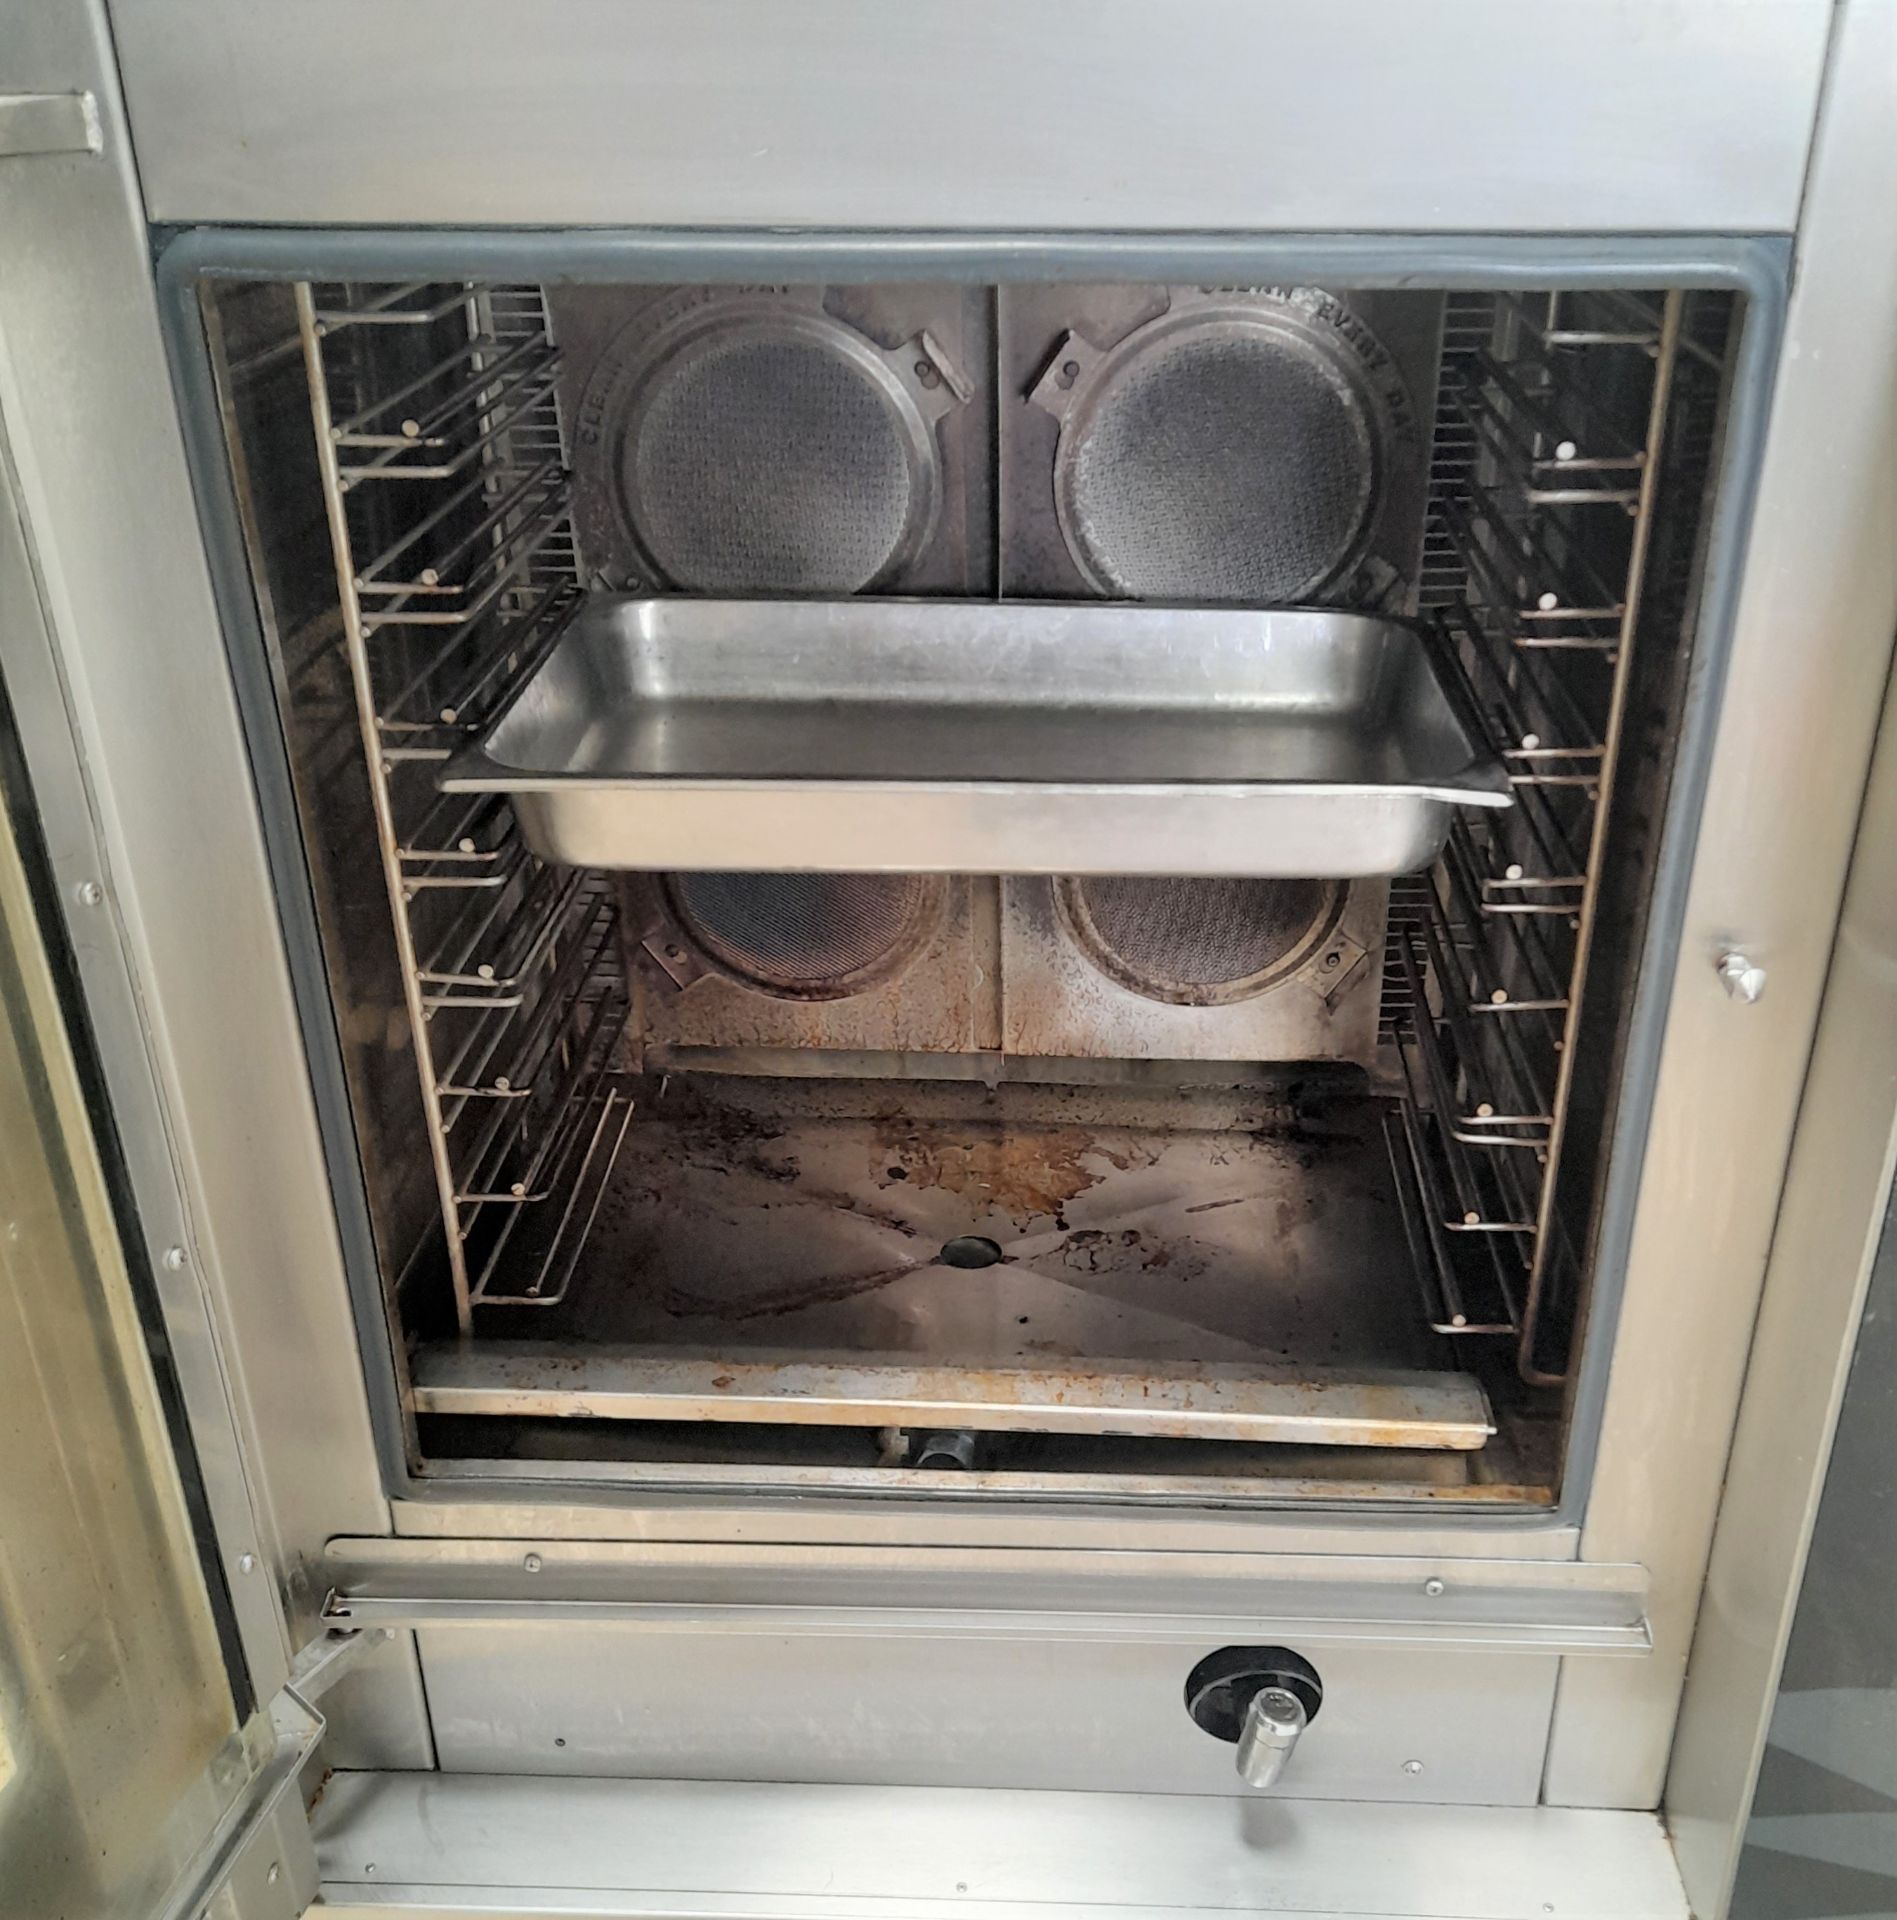 1 x Fri-Jado Turbo Retail 8 Grid Combi Oven - 3 Phase Combi Oven With Various Cooking Programs - Image 15 of 24